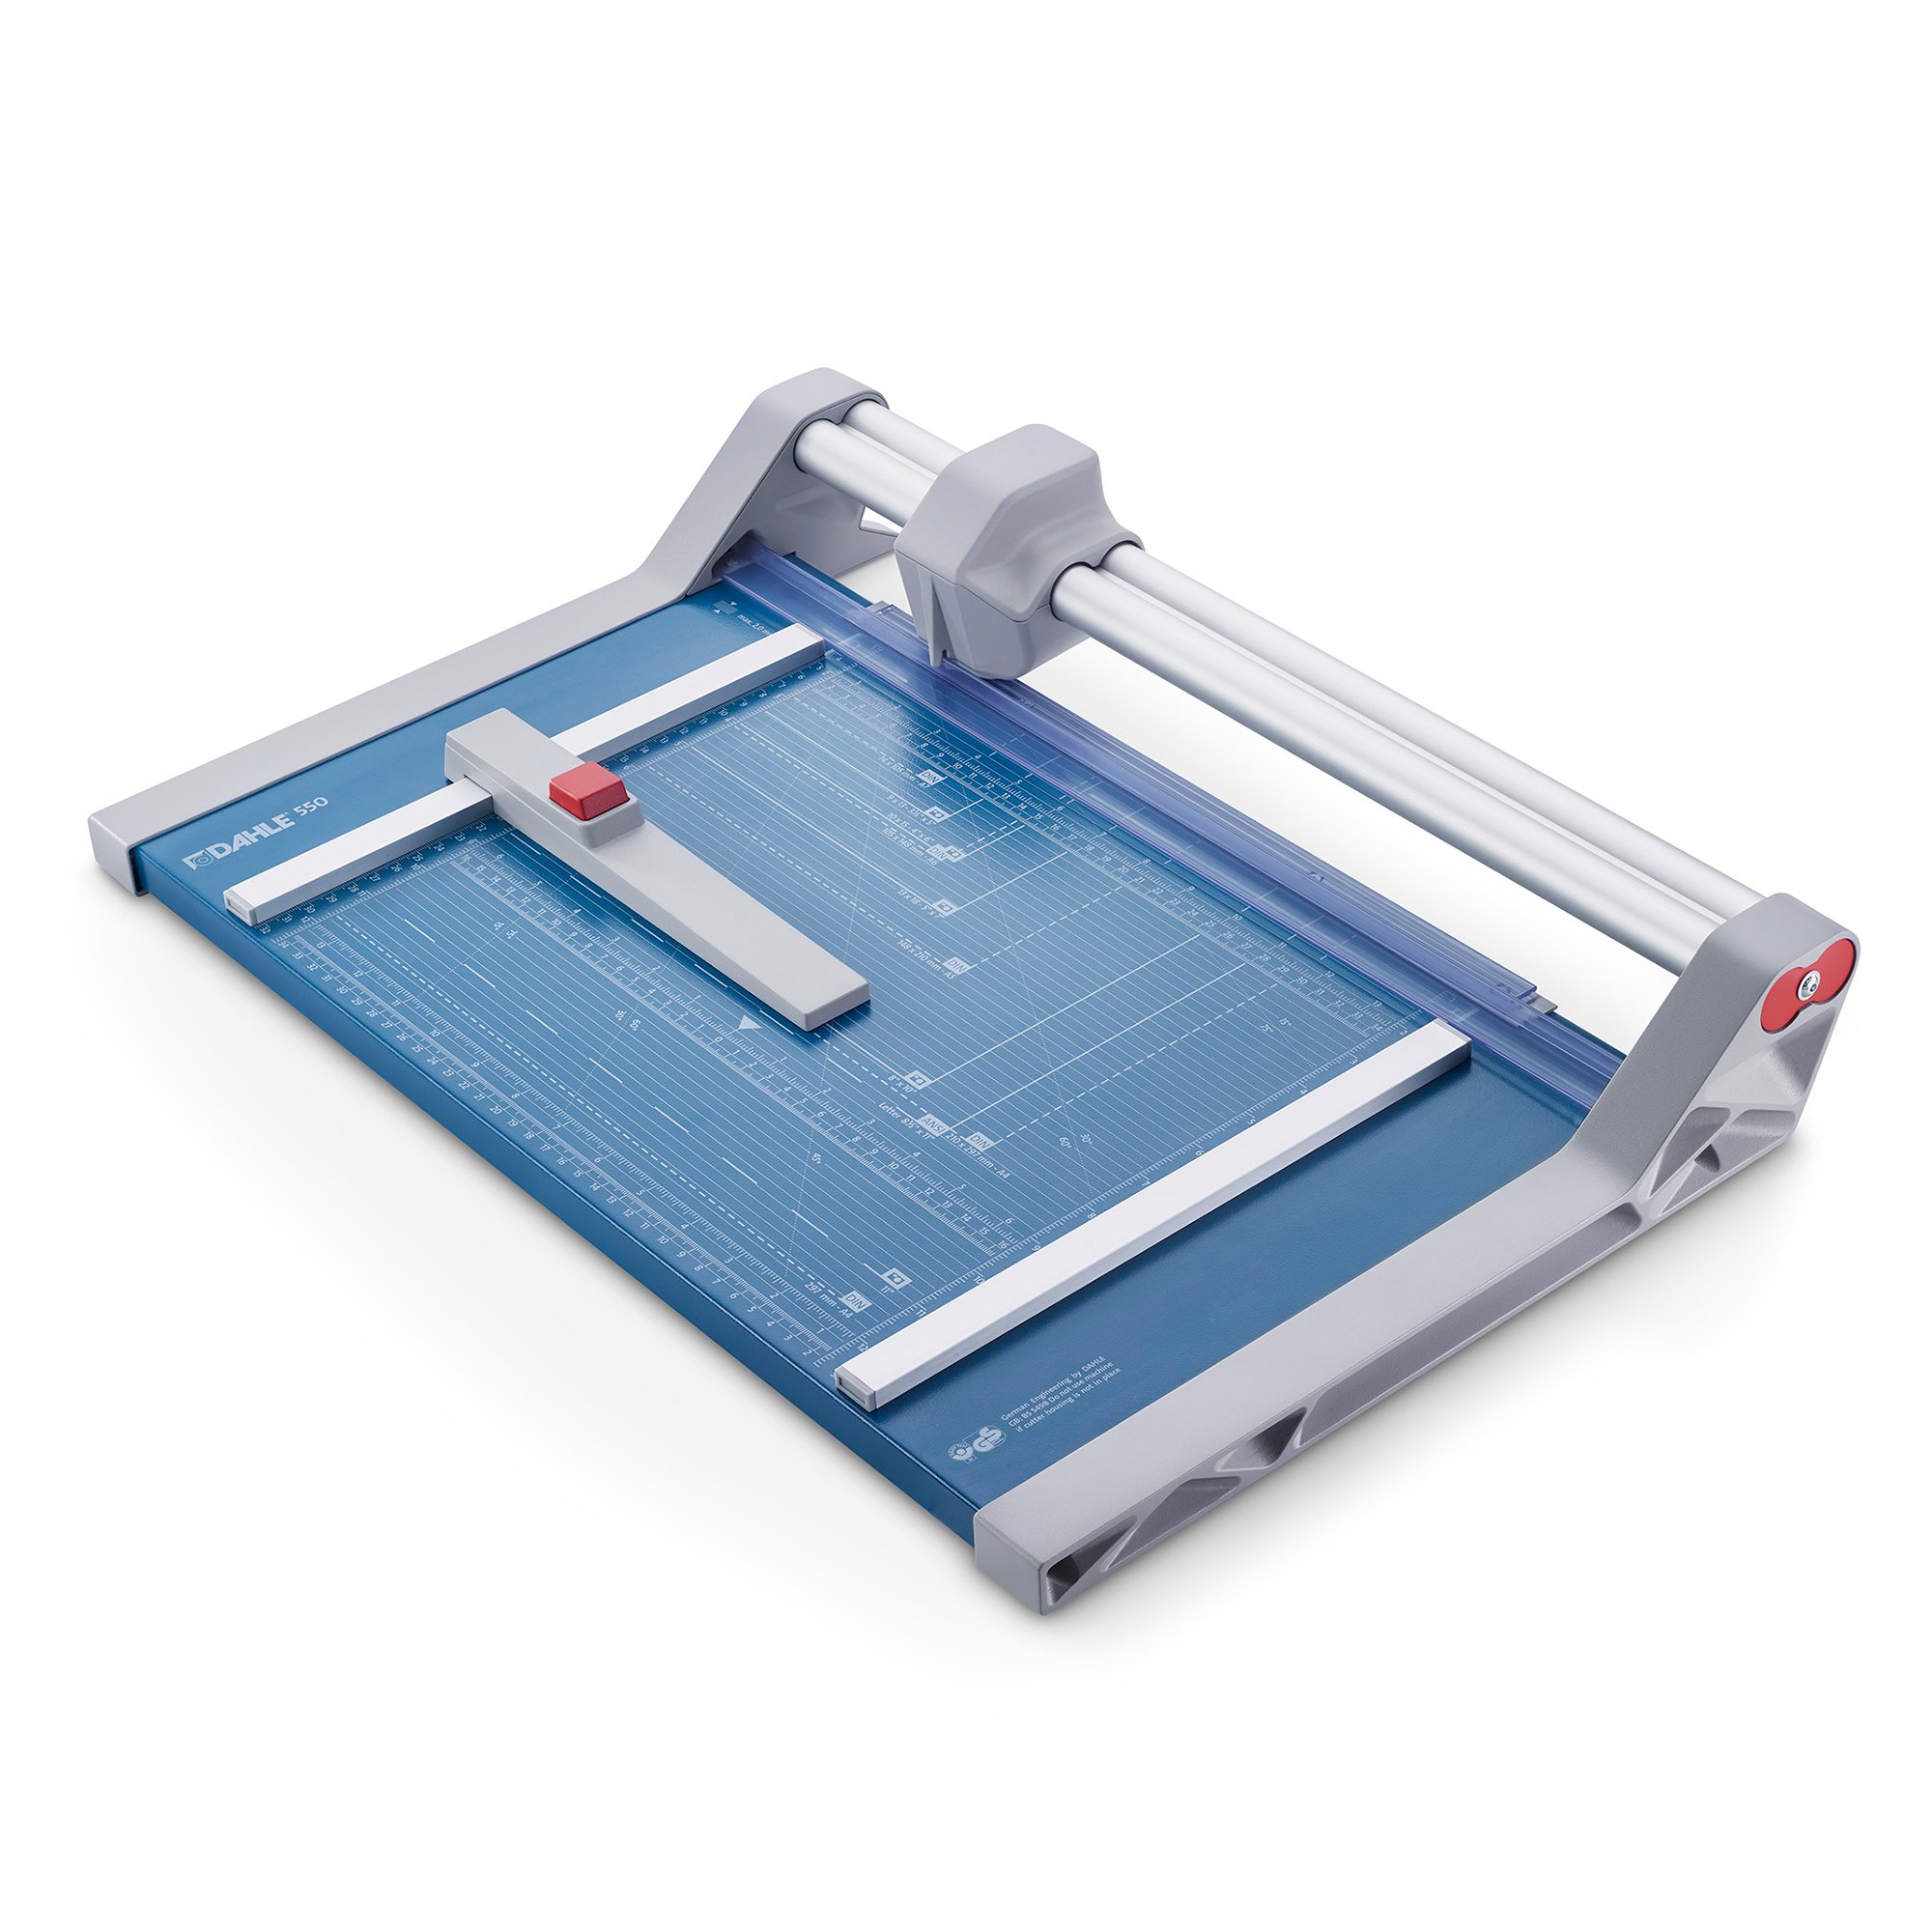 Dahle 550 A4 Professional Paper Trimmer (Gen3) - Click Image to Close